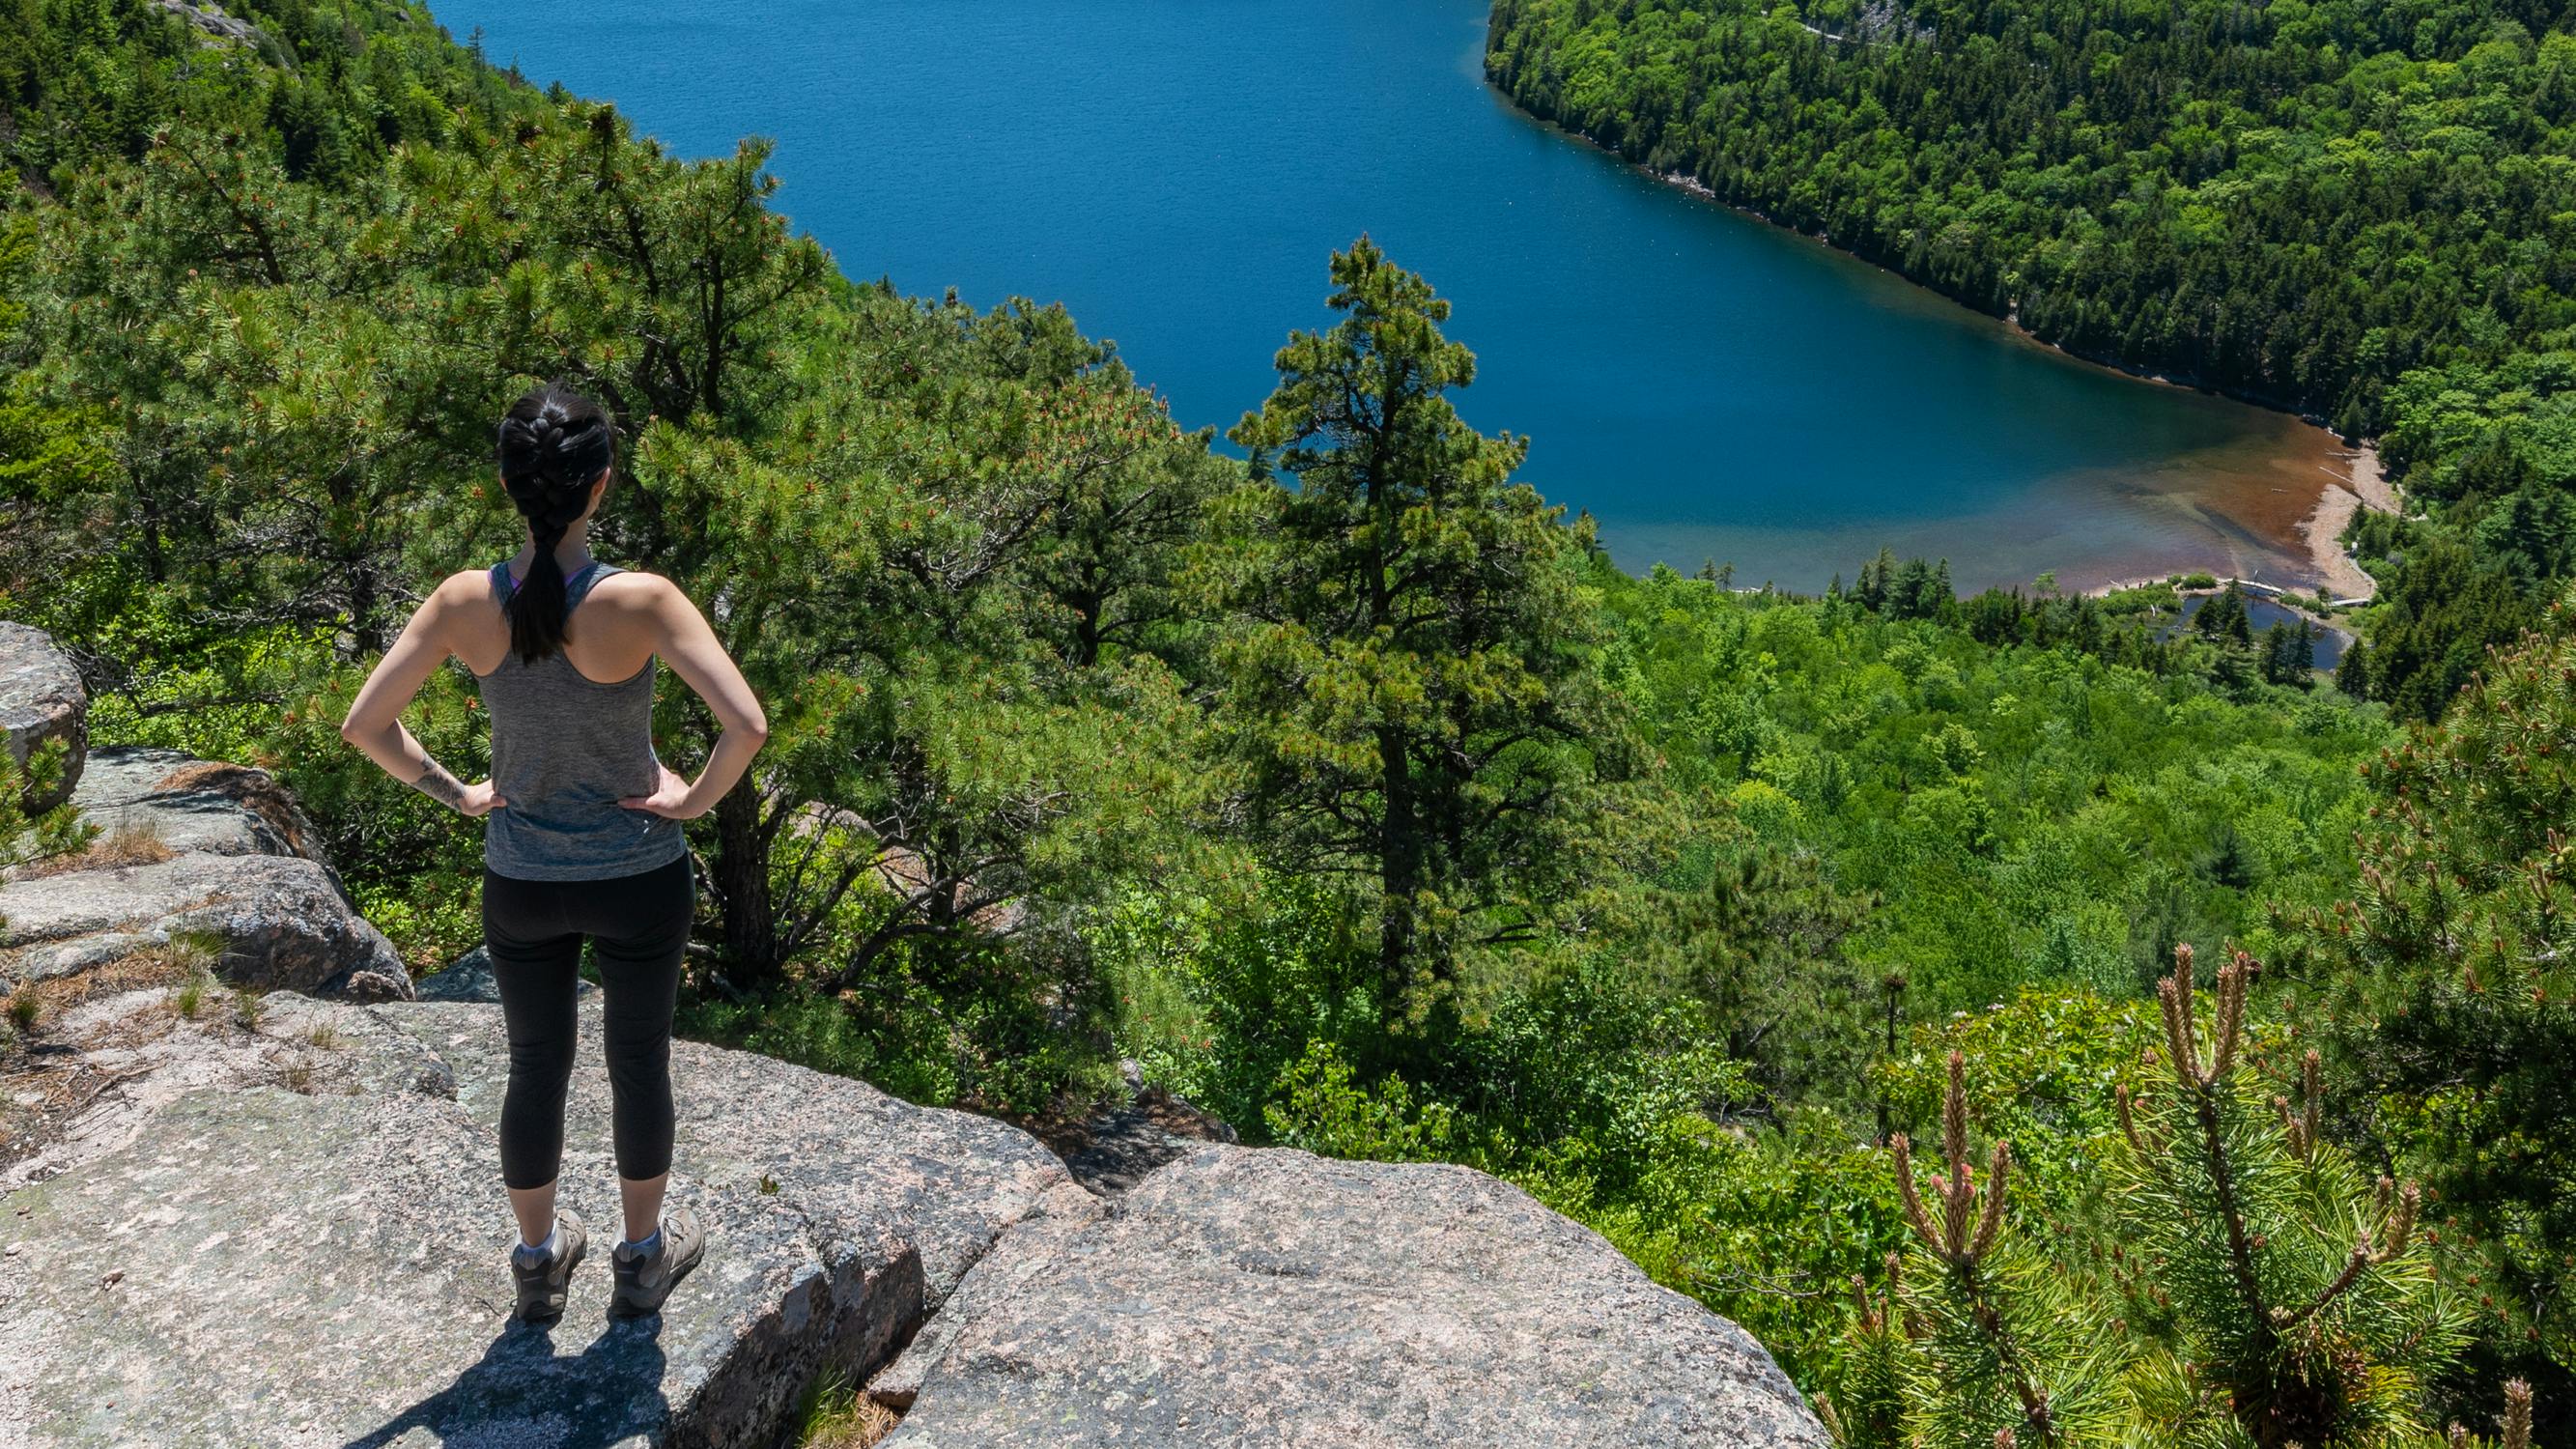 Woman standing on a cliff, looking out at the forest and lake below